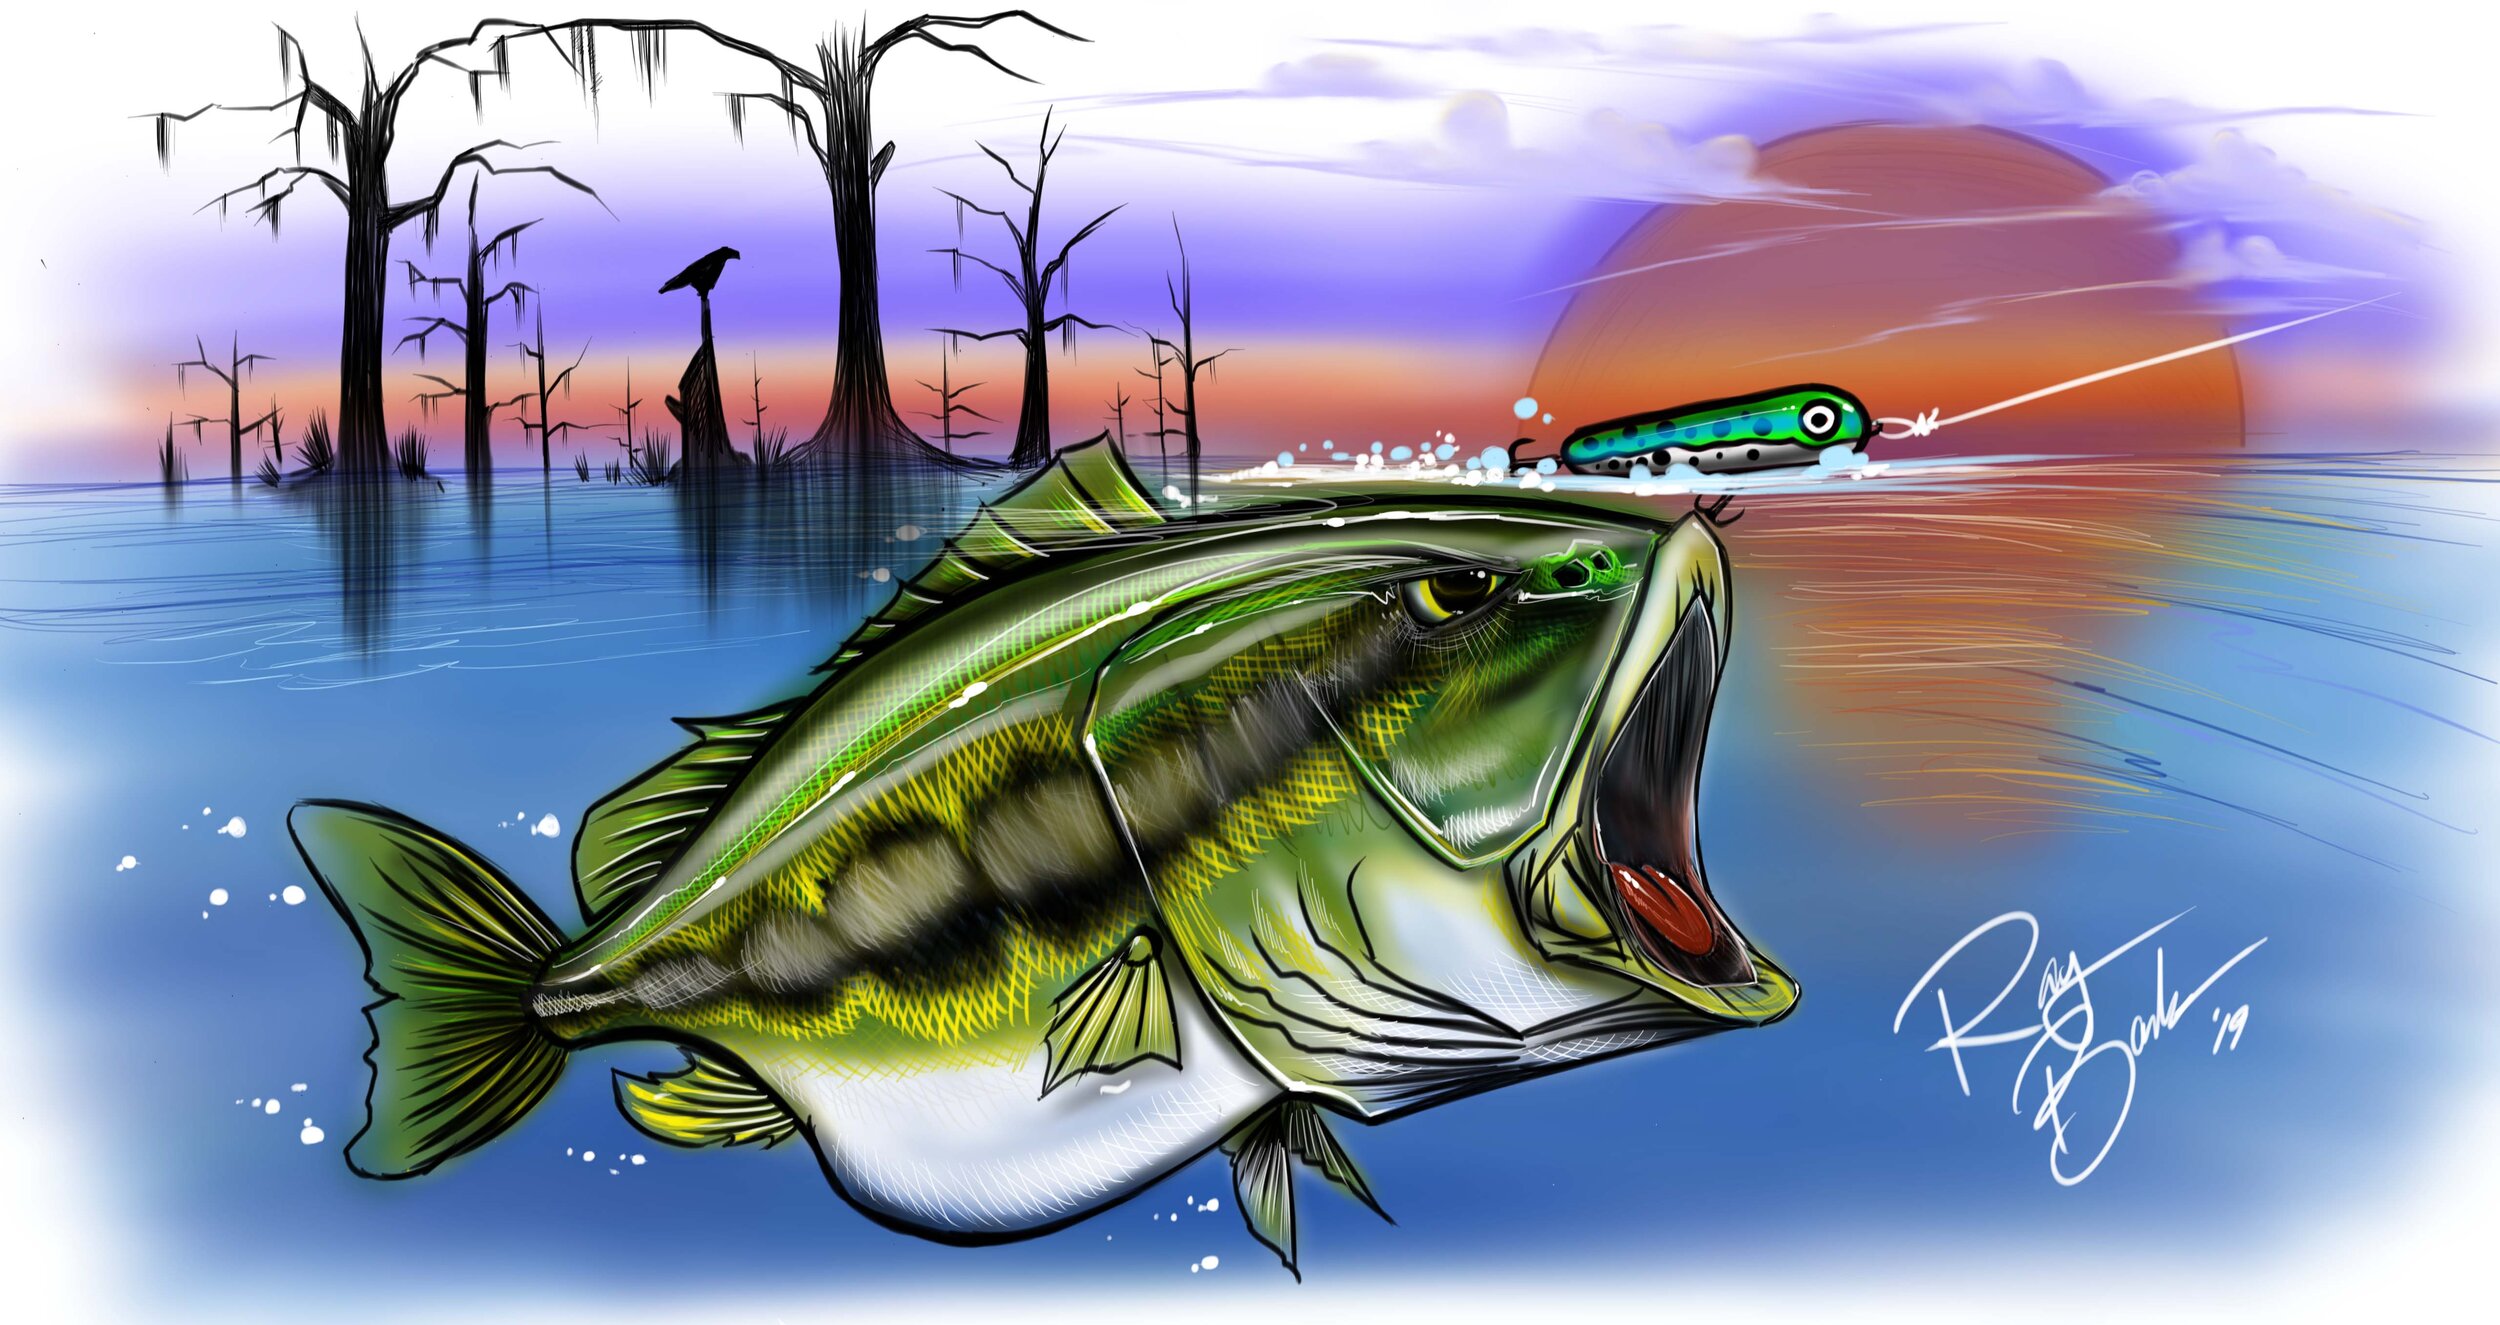 Bass Fishing Wallpapers APK 150 for Android  Download Bass Fishing  Wallpapers APK Latest Version from APKFabcom